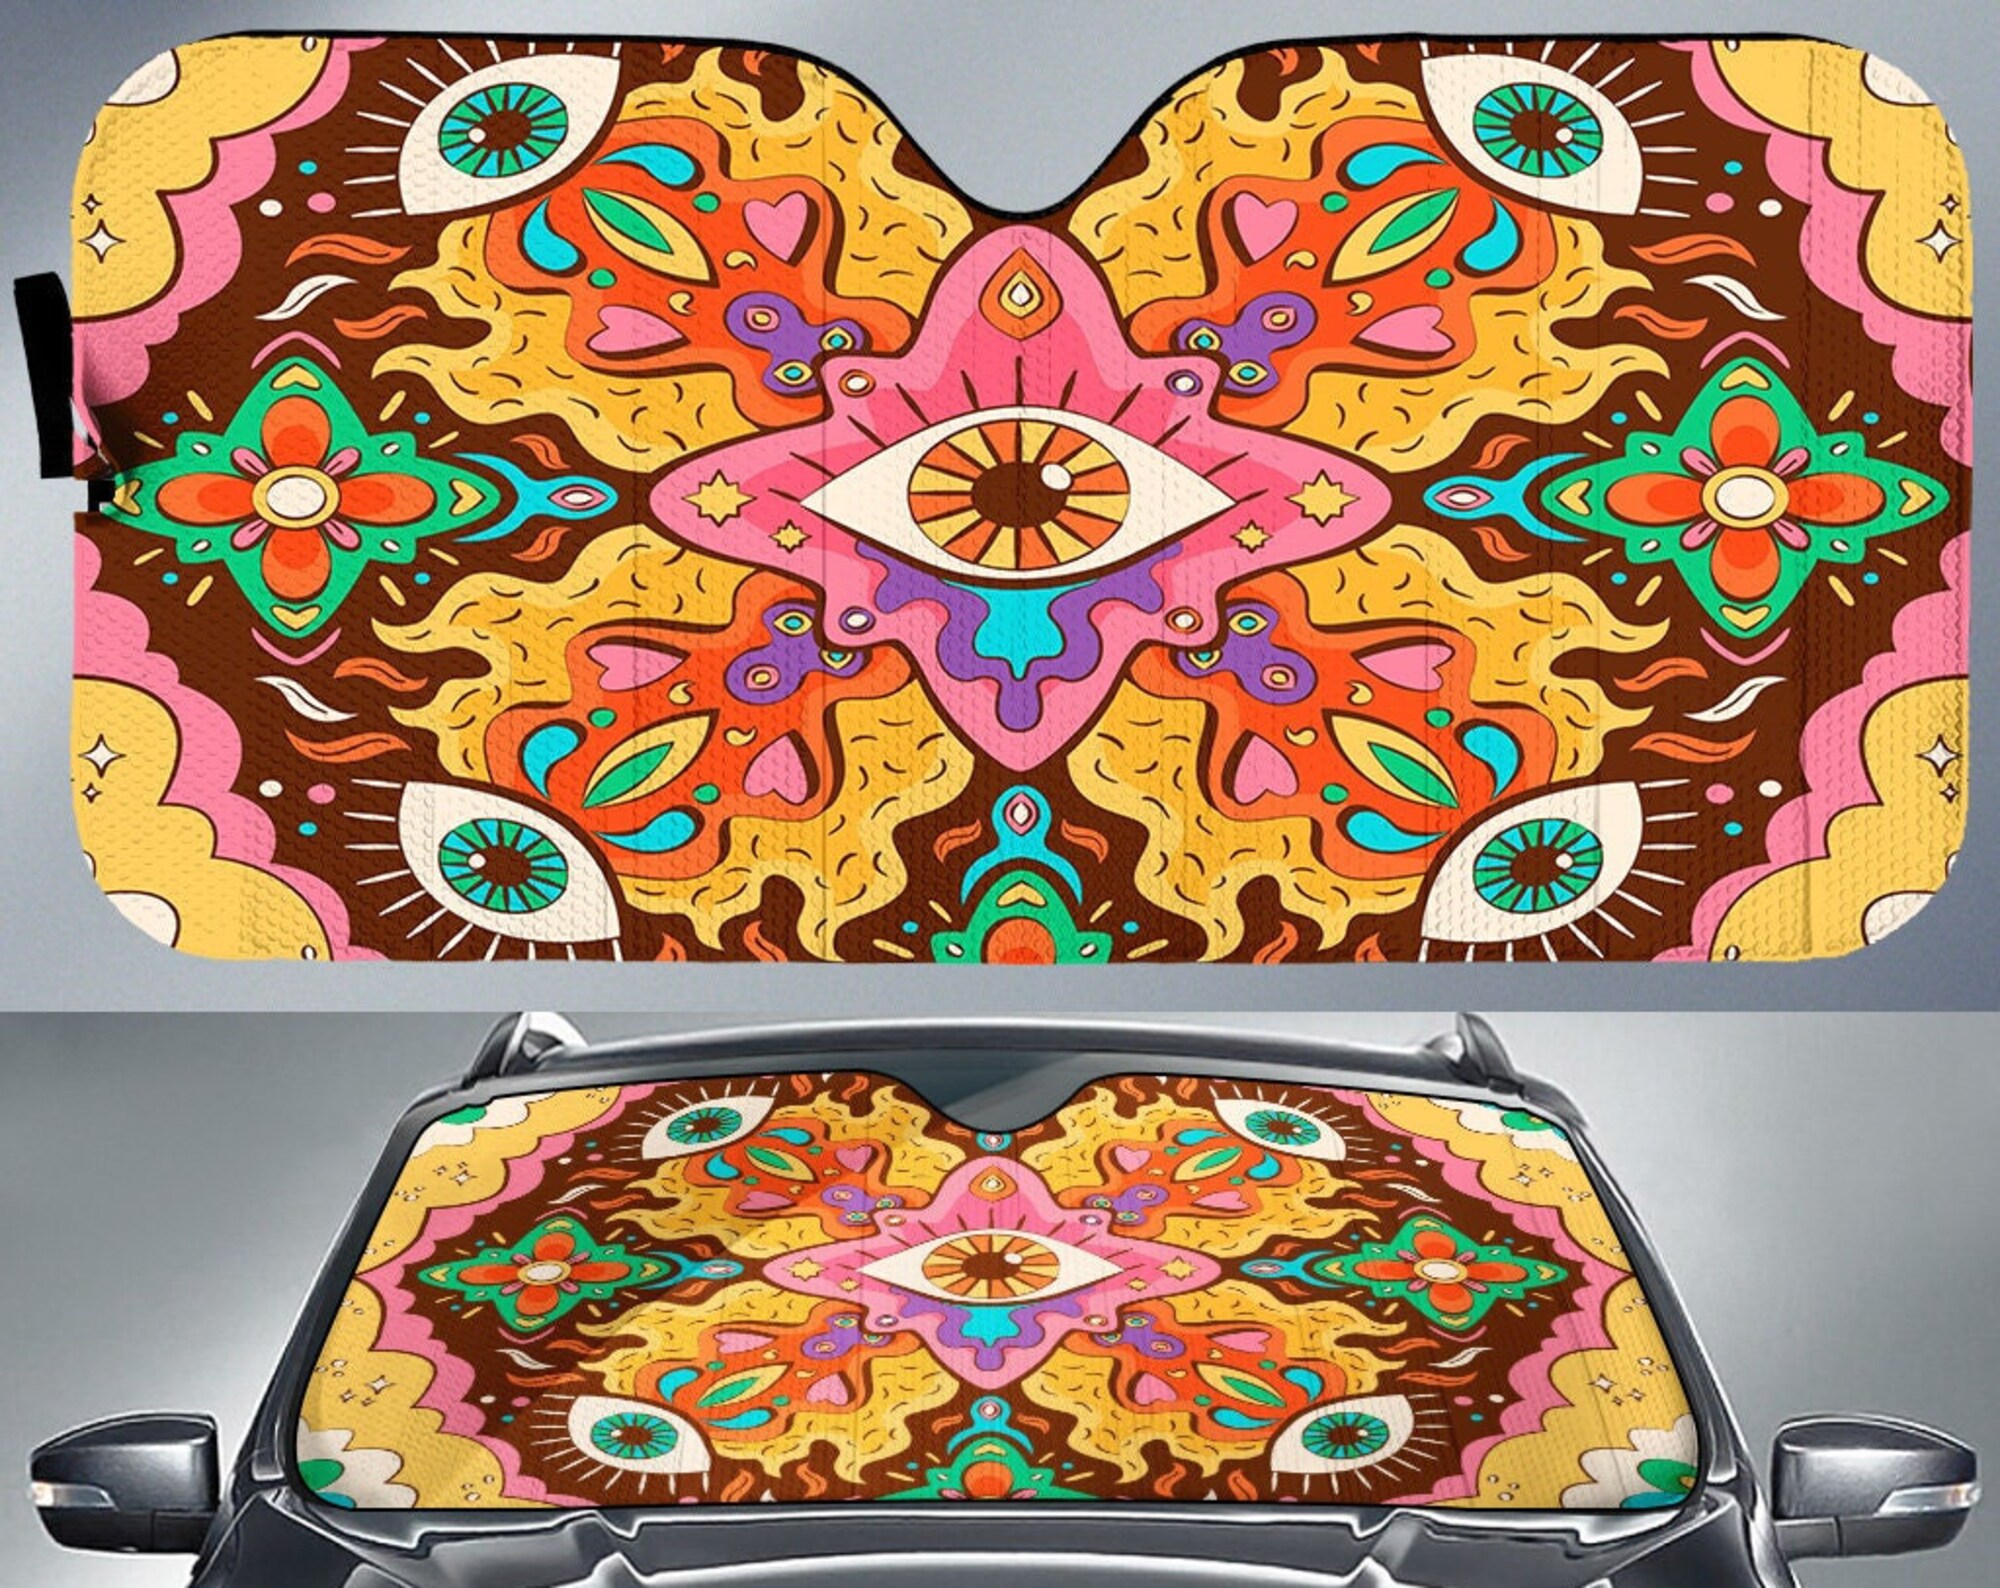 Discover Psychedelic Windshield Car Auto Sun Shade